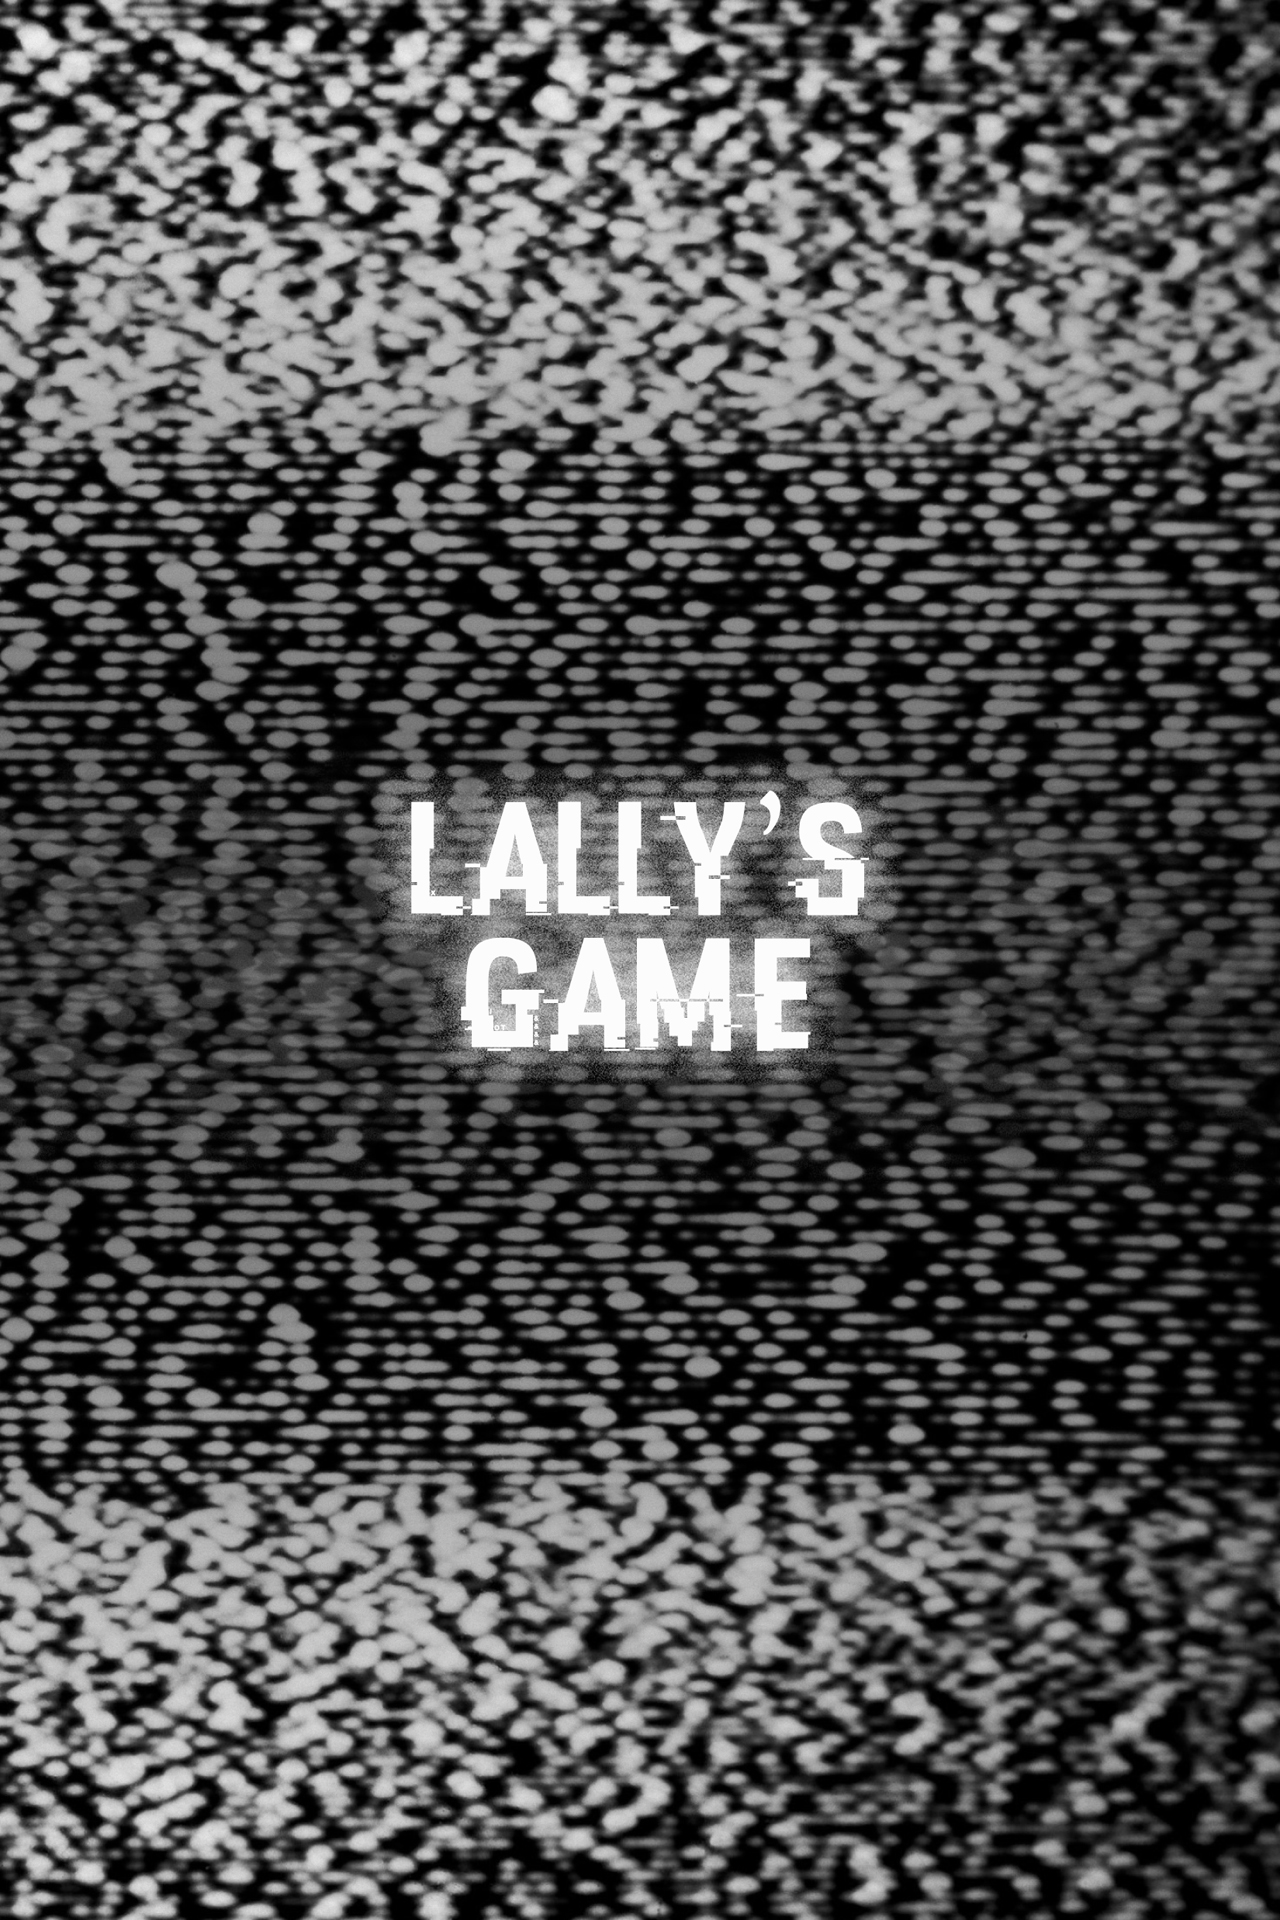 Tales from the Pizzaplex #1: Lally's Game, Five Nights at Freddy's Wiki